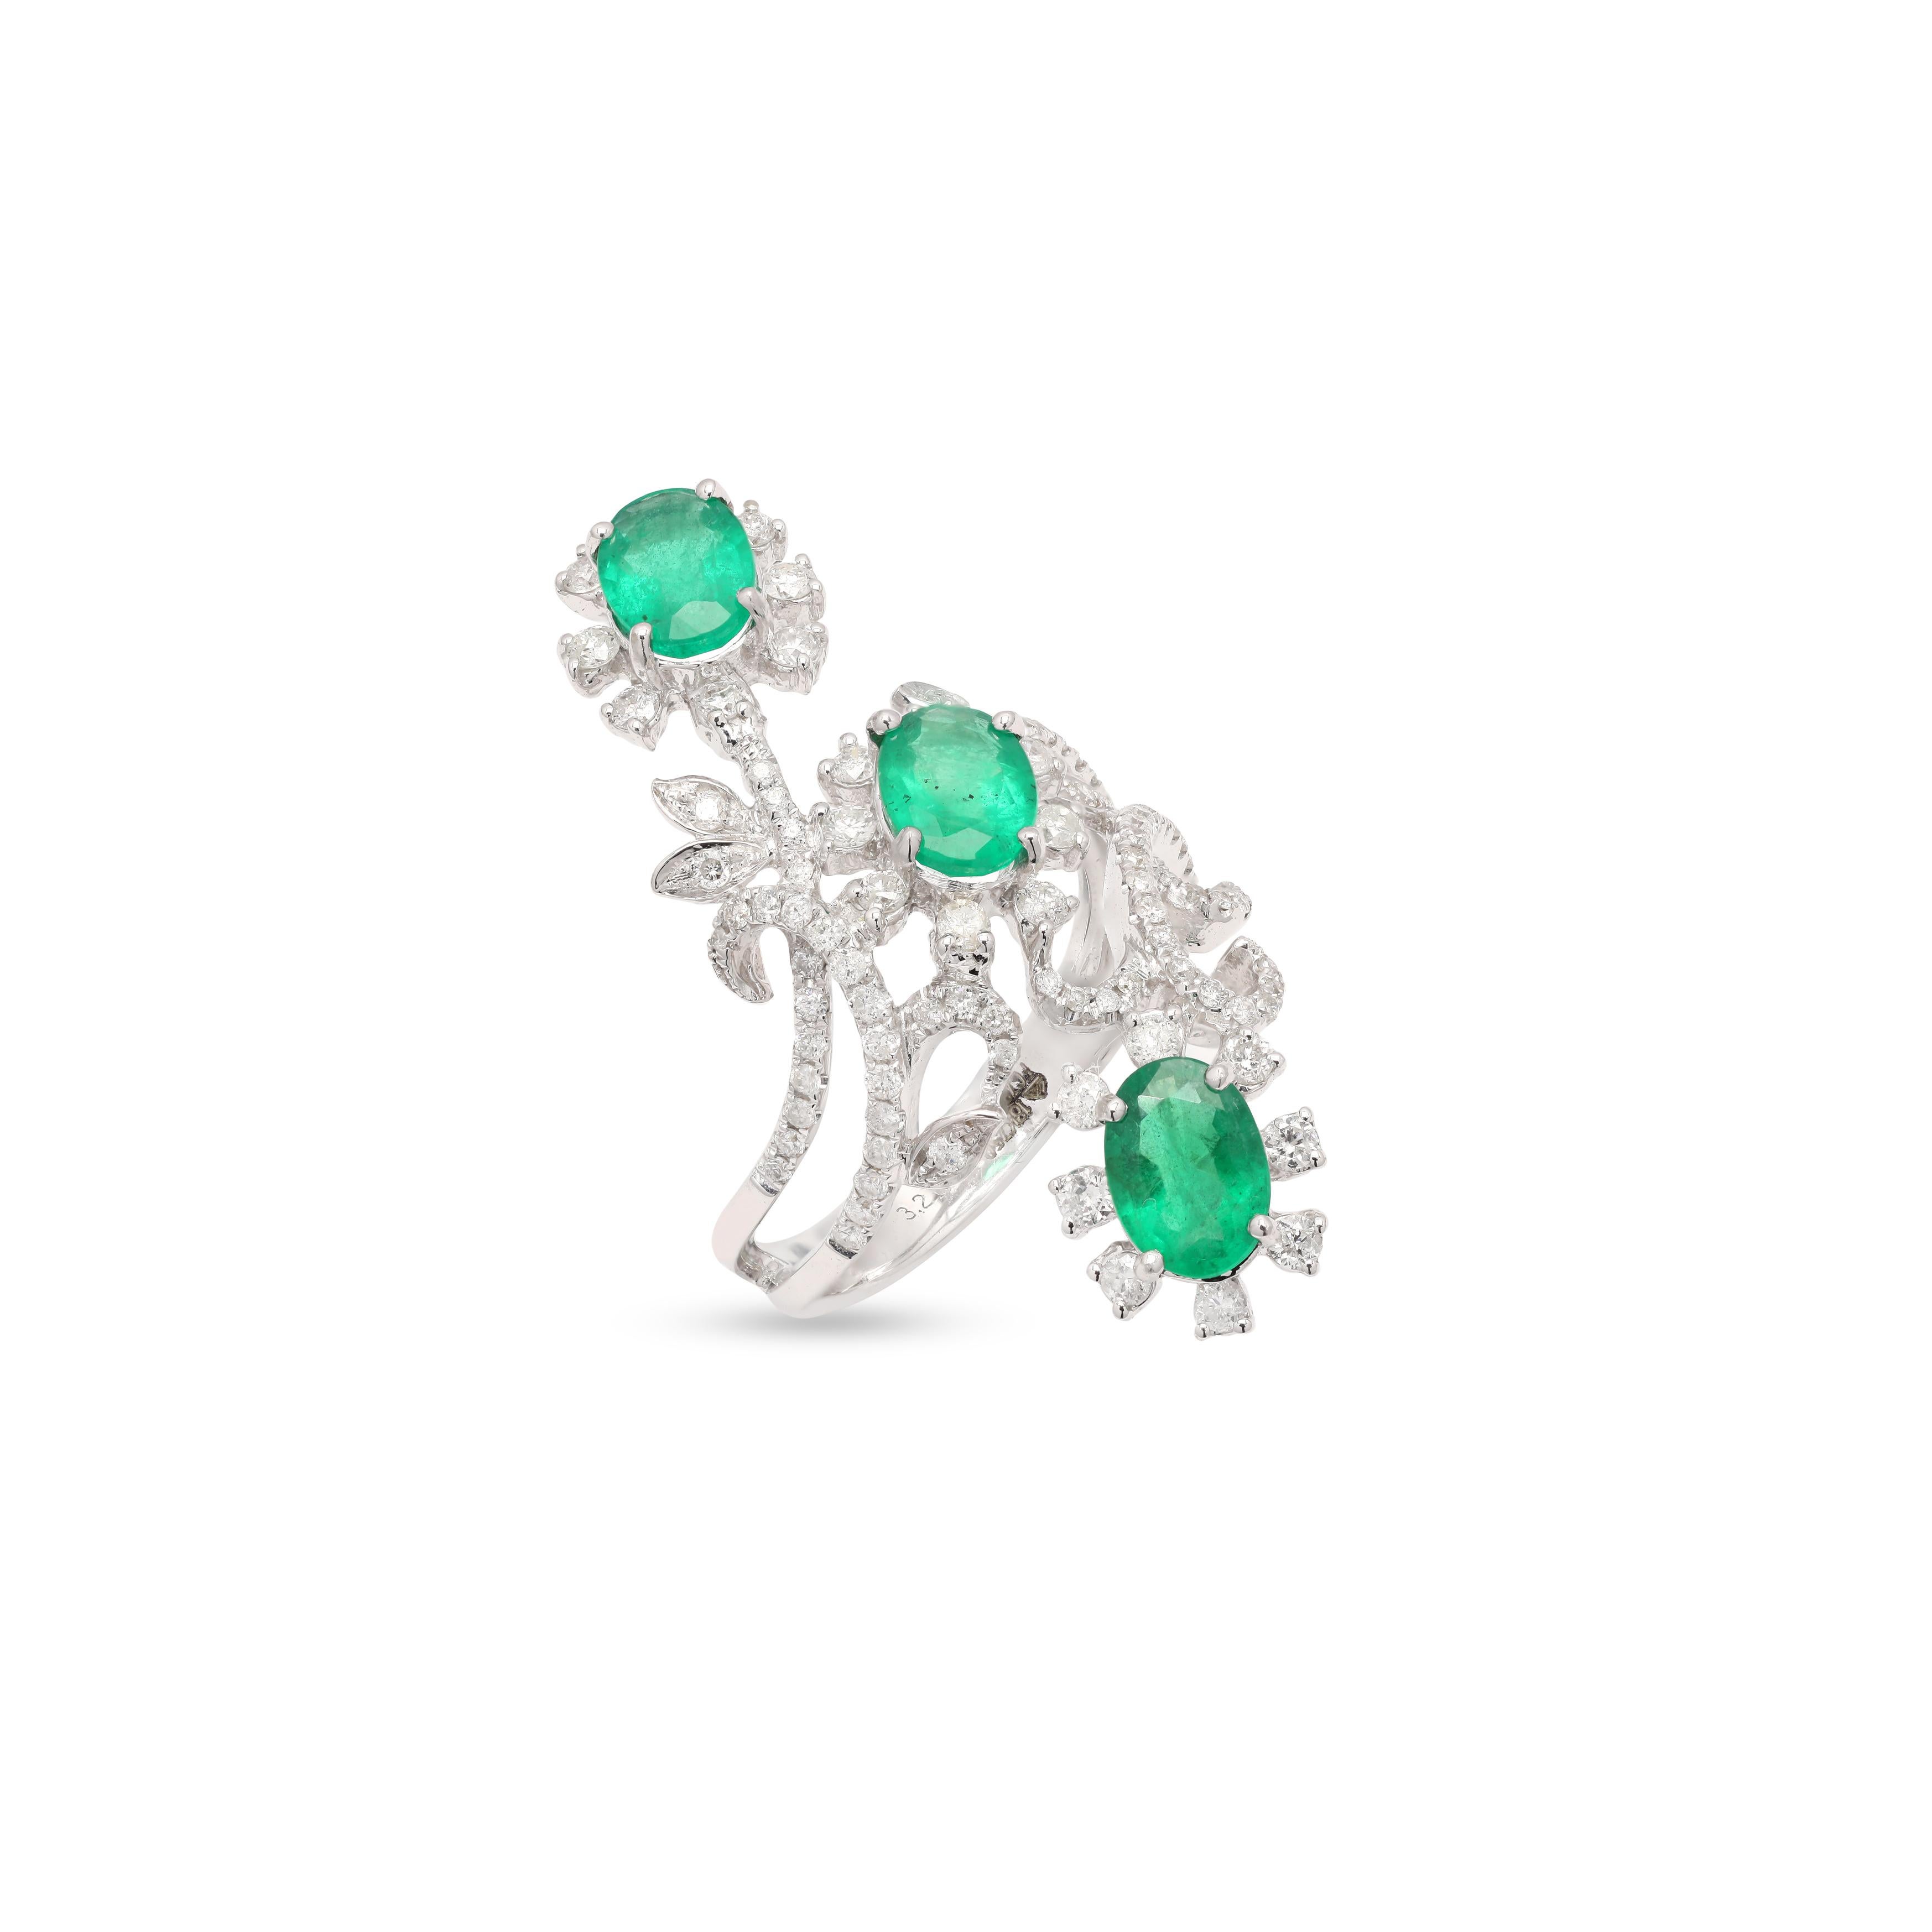 For Sale:  14K White Gold Three Stone Emerald and Diamond Cocktail Ring 3